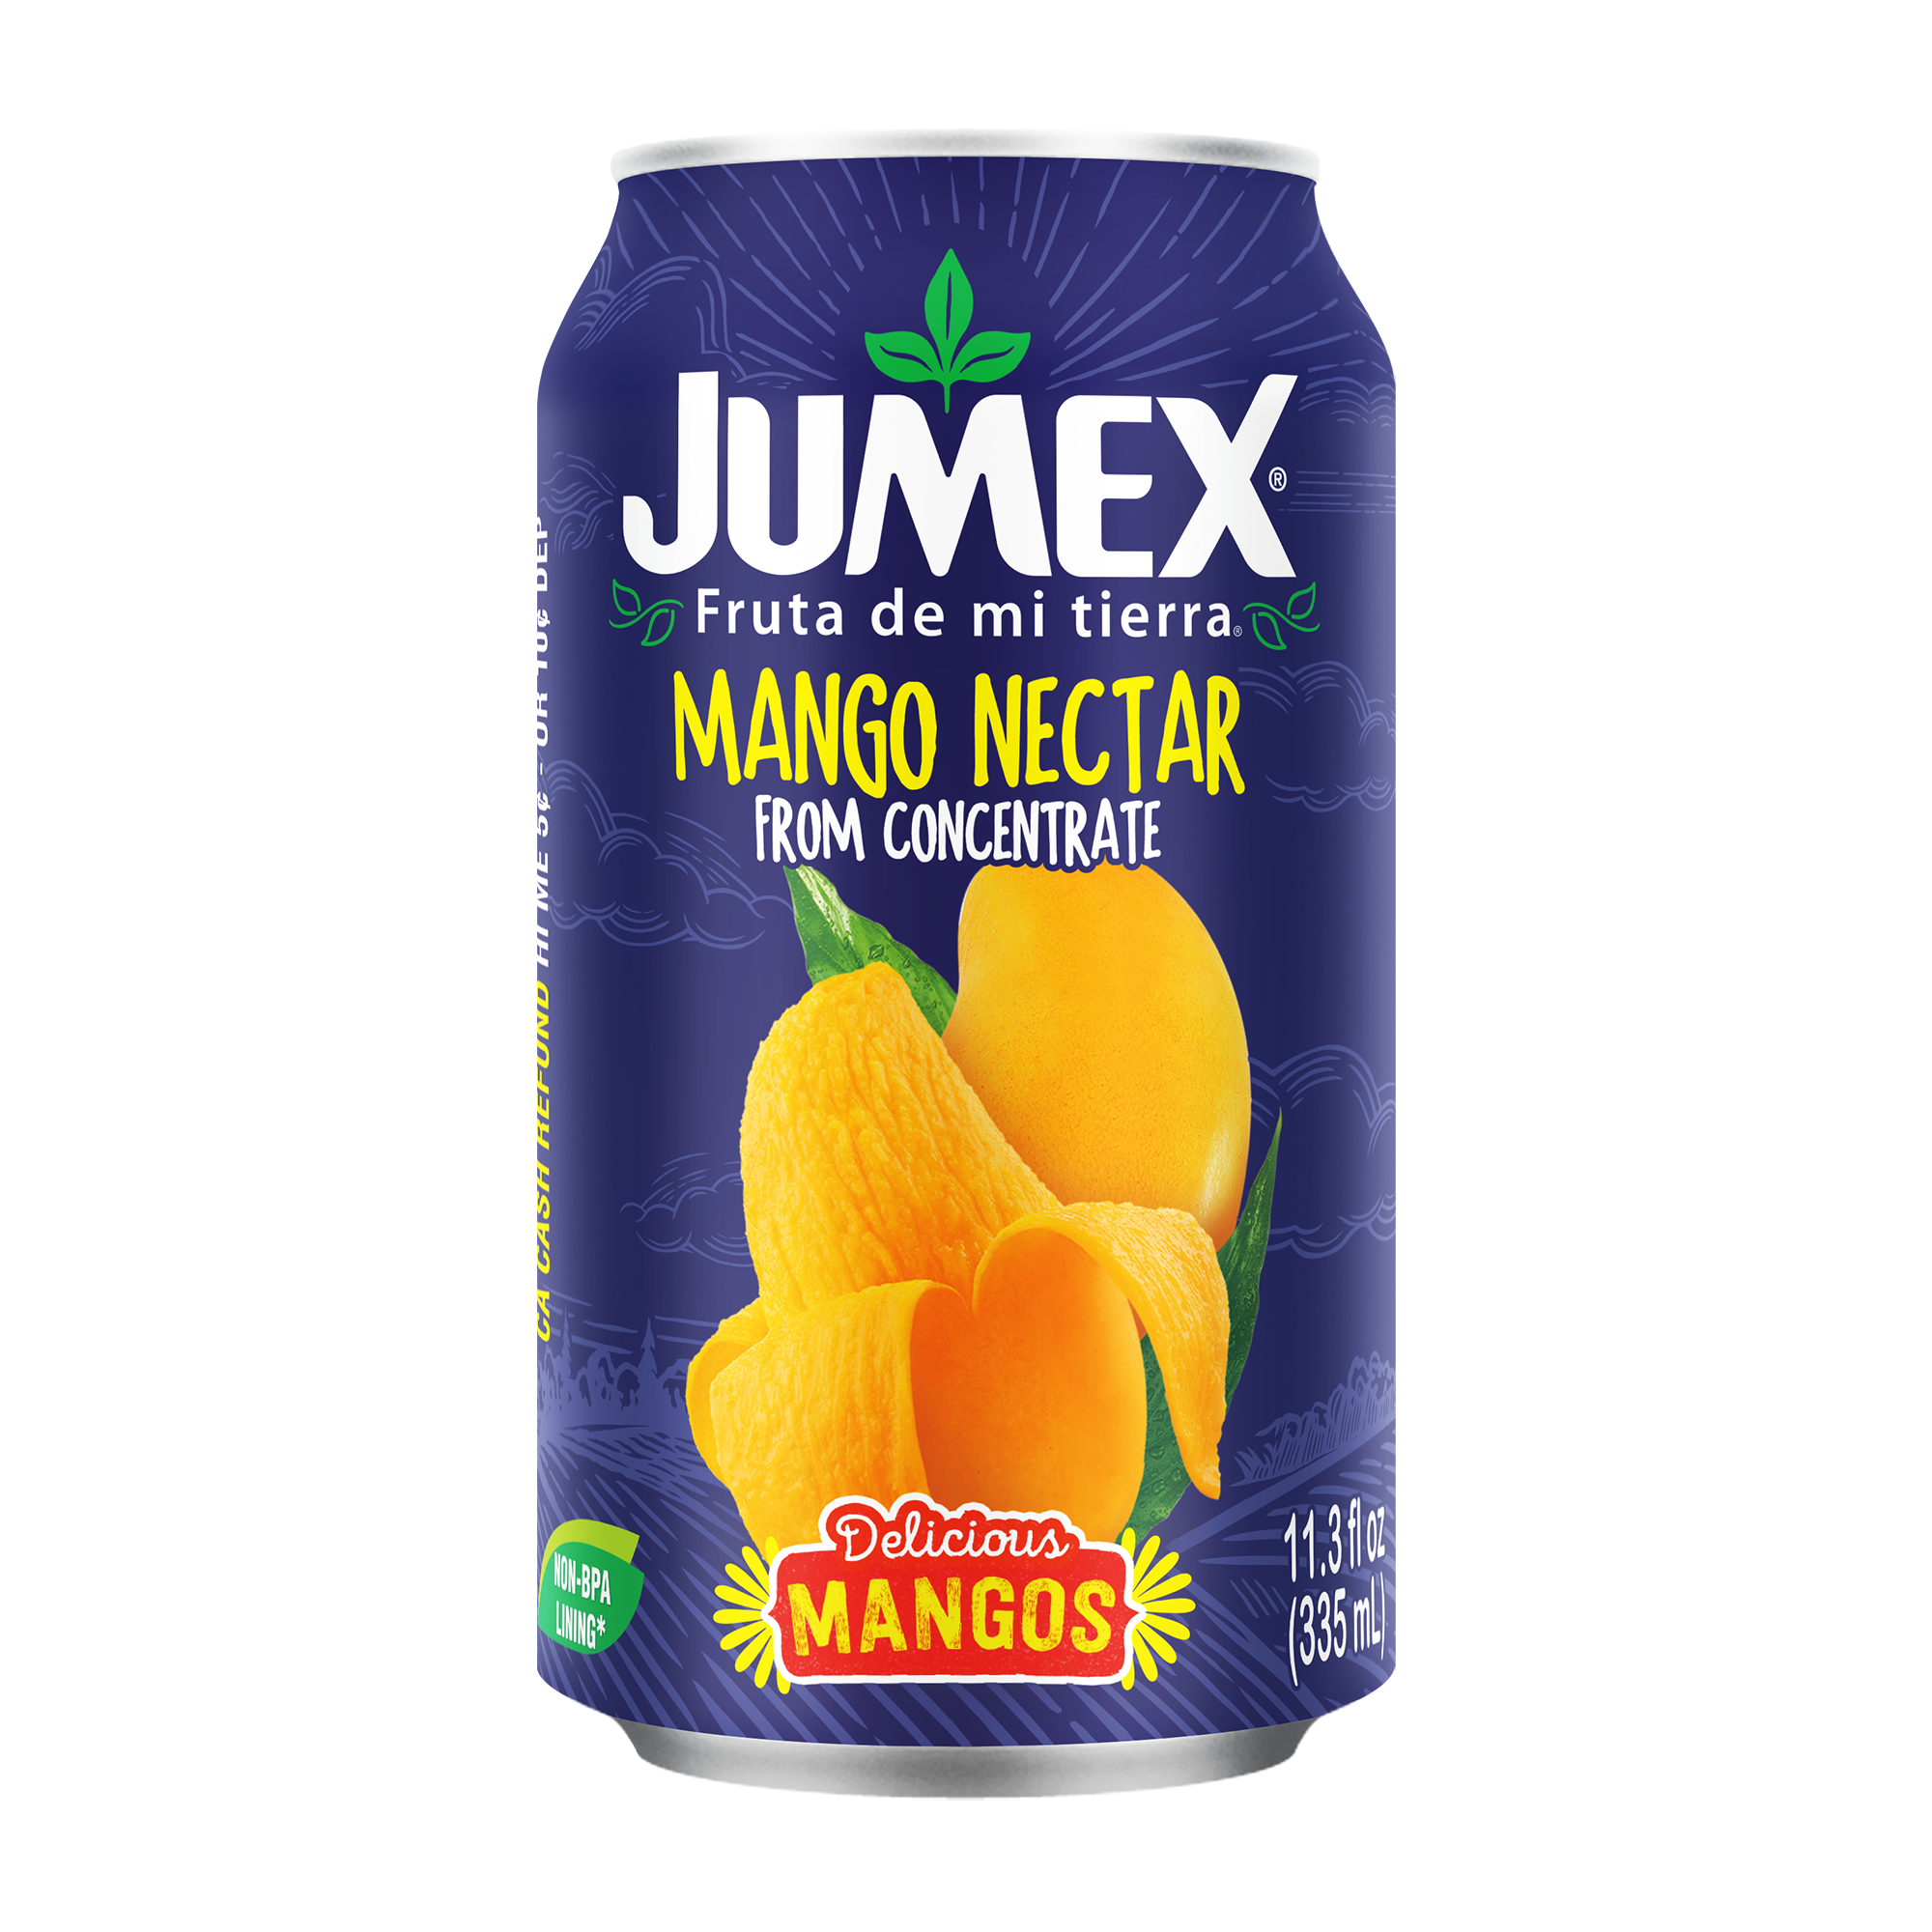 Jumex Mango Nectar from Concentrate, 11.3 Fl. oz. - image 1 of 6